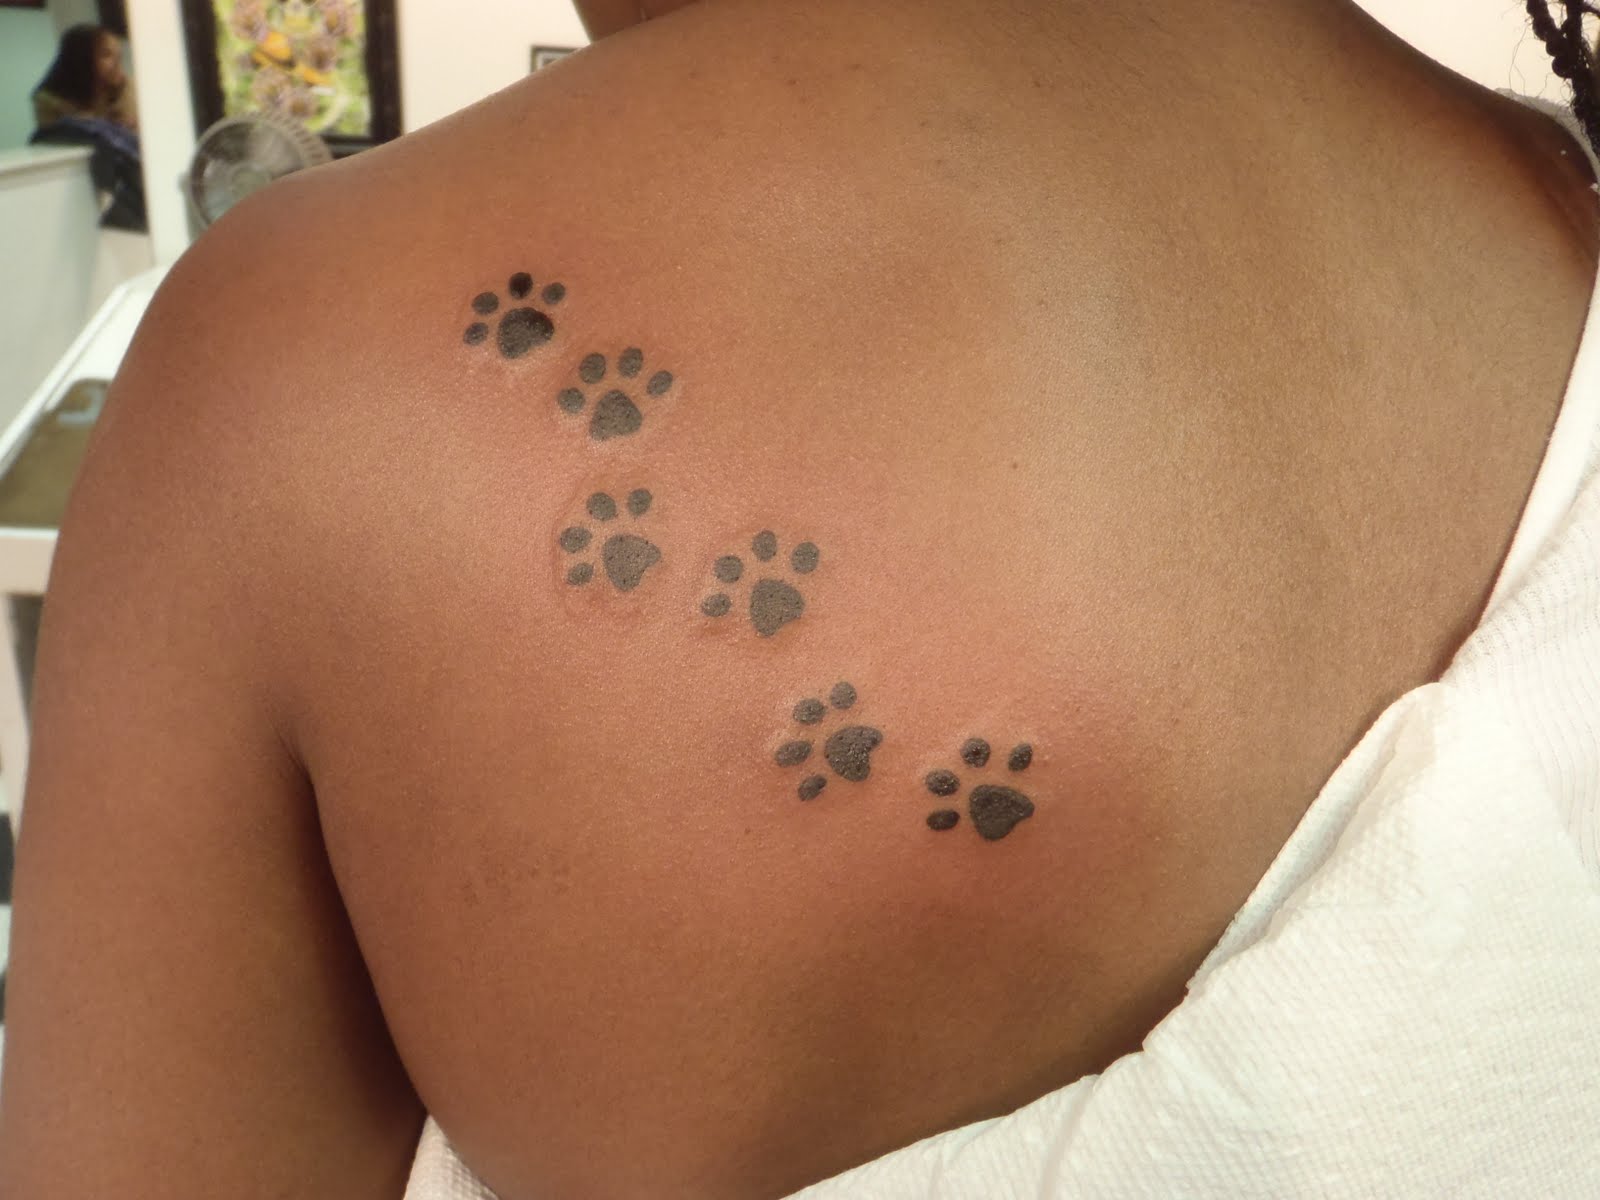 Paw Print Tattoos Designs, Ideas and Meaning | Tattoos For You